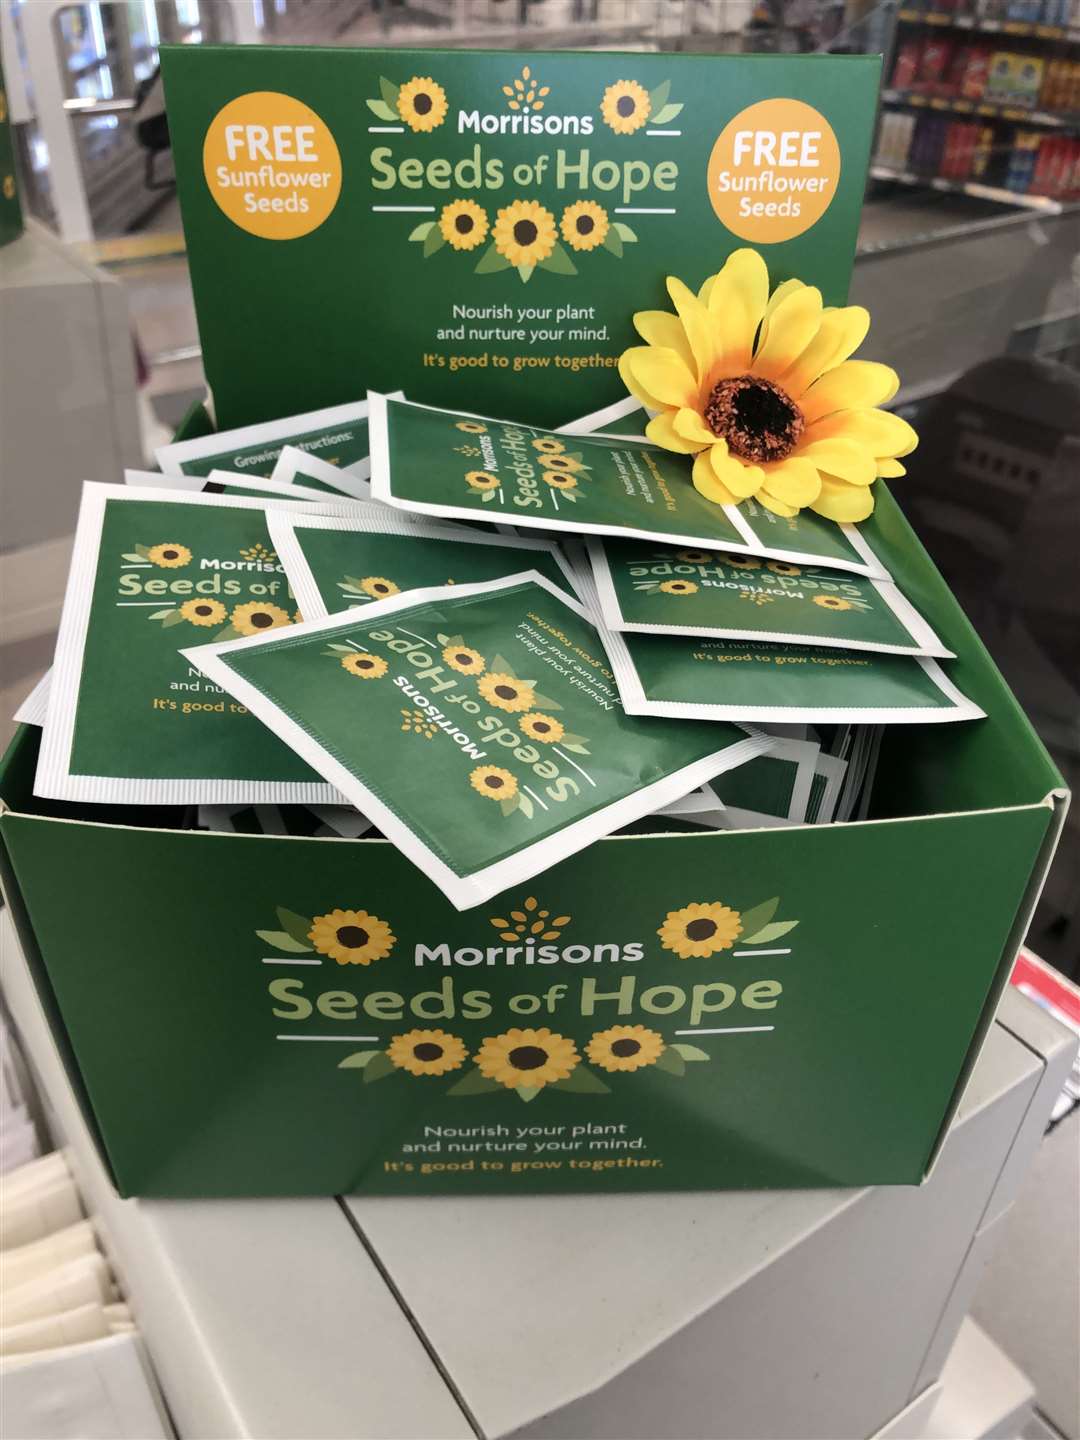 Pick up your sunflower seeds at Morrisons